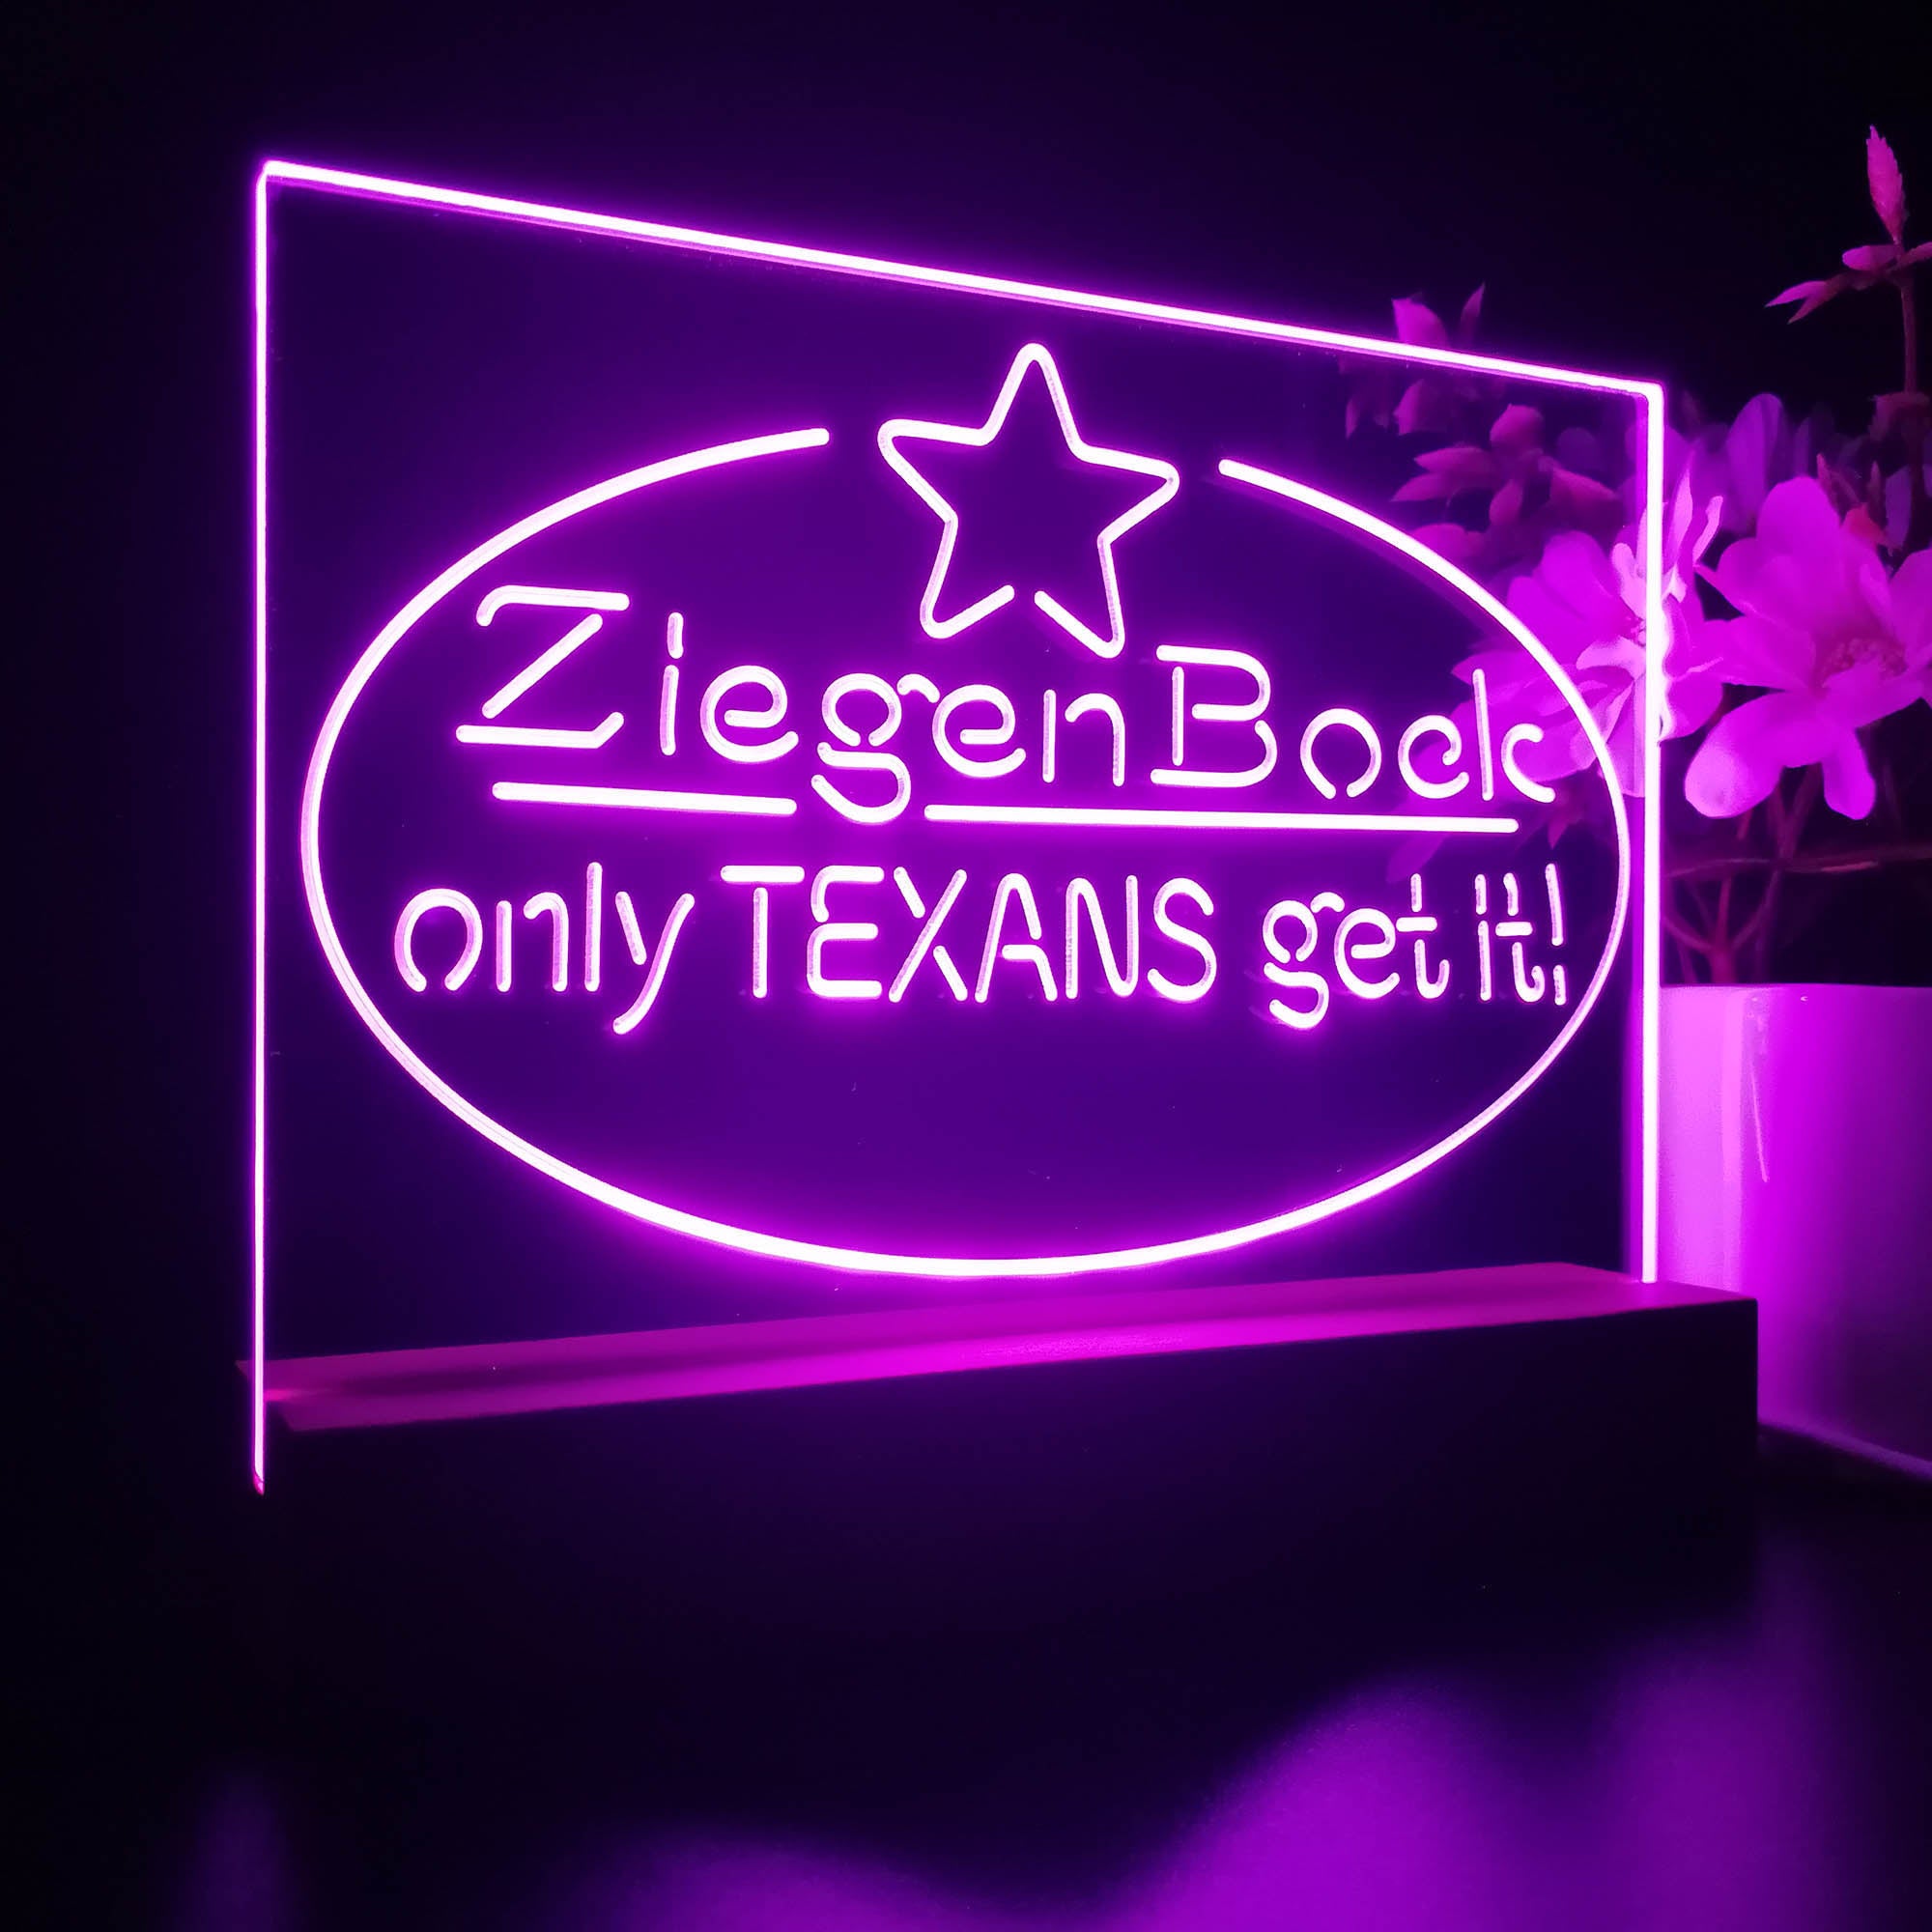 ZiegenBock Amber Only Texans Get it Night Light LED Sign